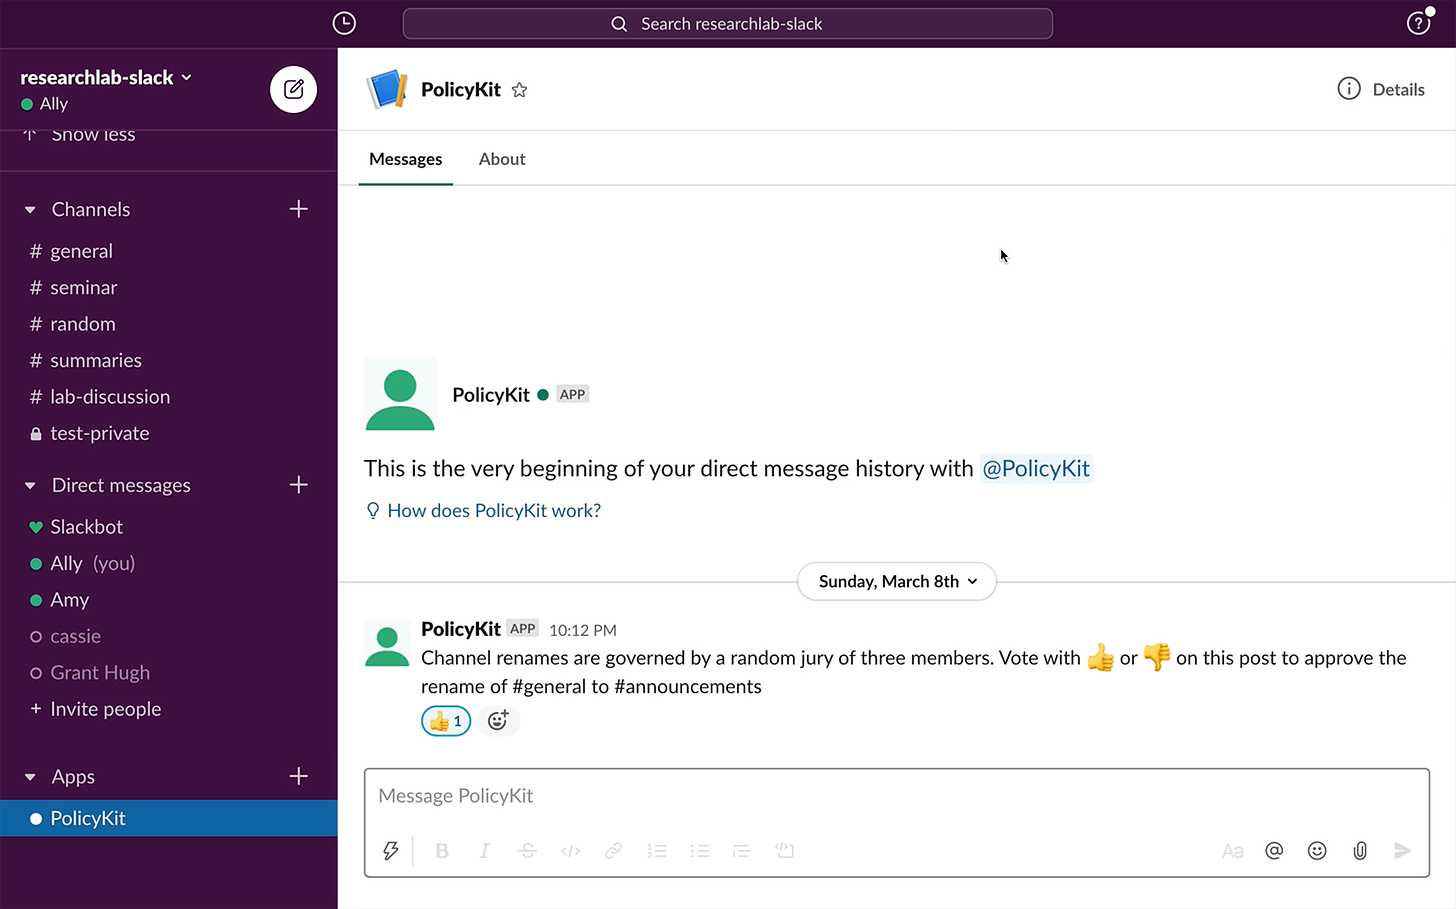 A screenshot of the app Slack, with the signature purple menu bar at left and white field at right. A direct message with “PolicyKit APP” is shown, with the message: “Channel renames are governed by a random jury of three members. Vote with (thumbs up) or (thumbs down) on this post to approve the rename of #general to #announcements”